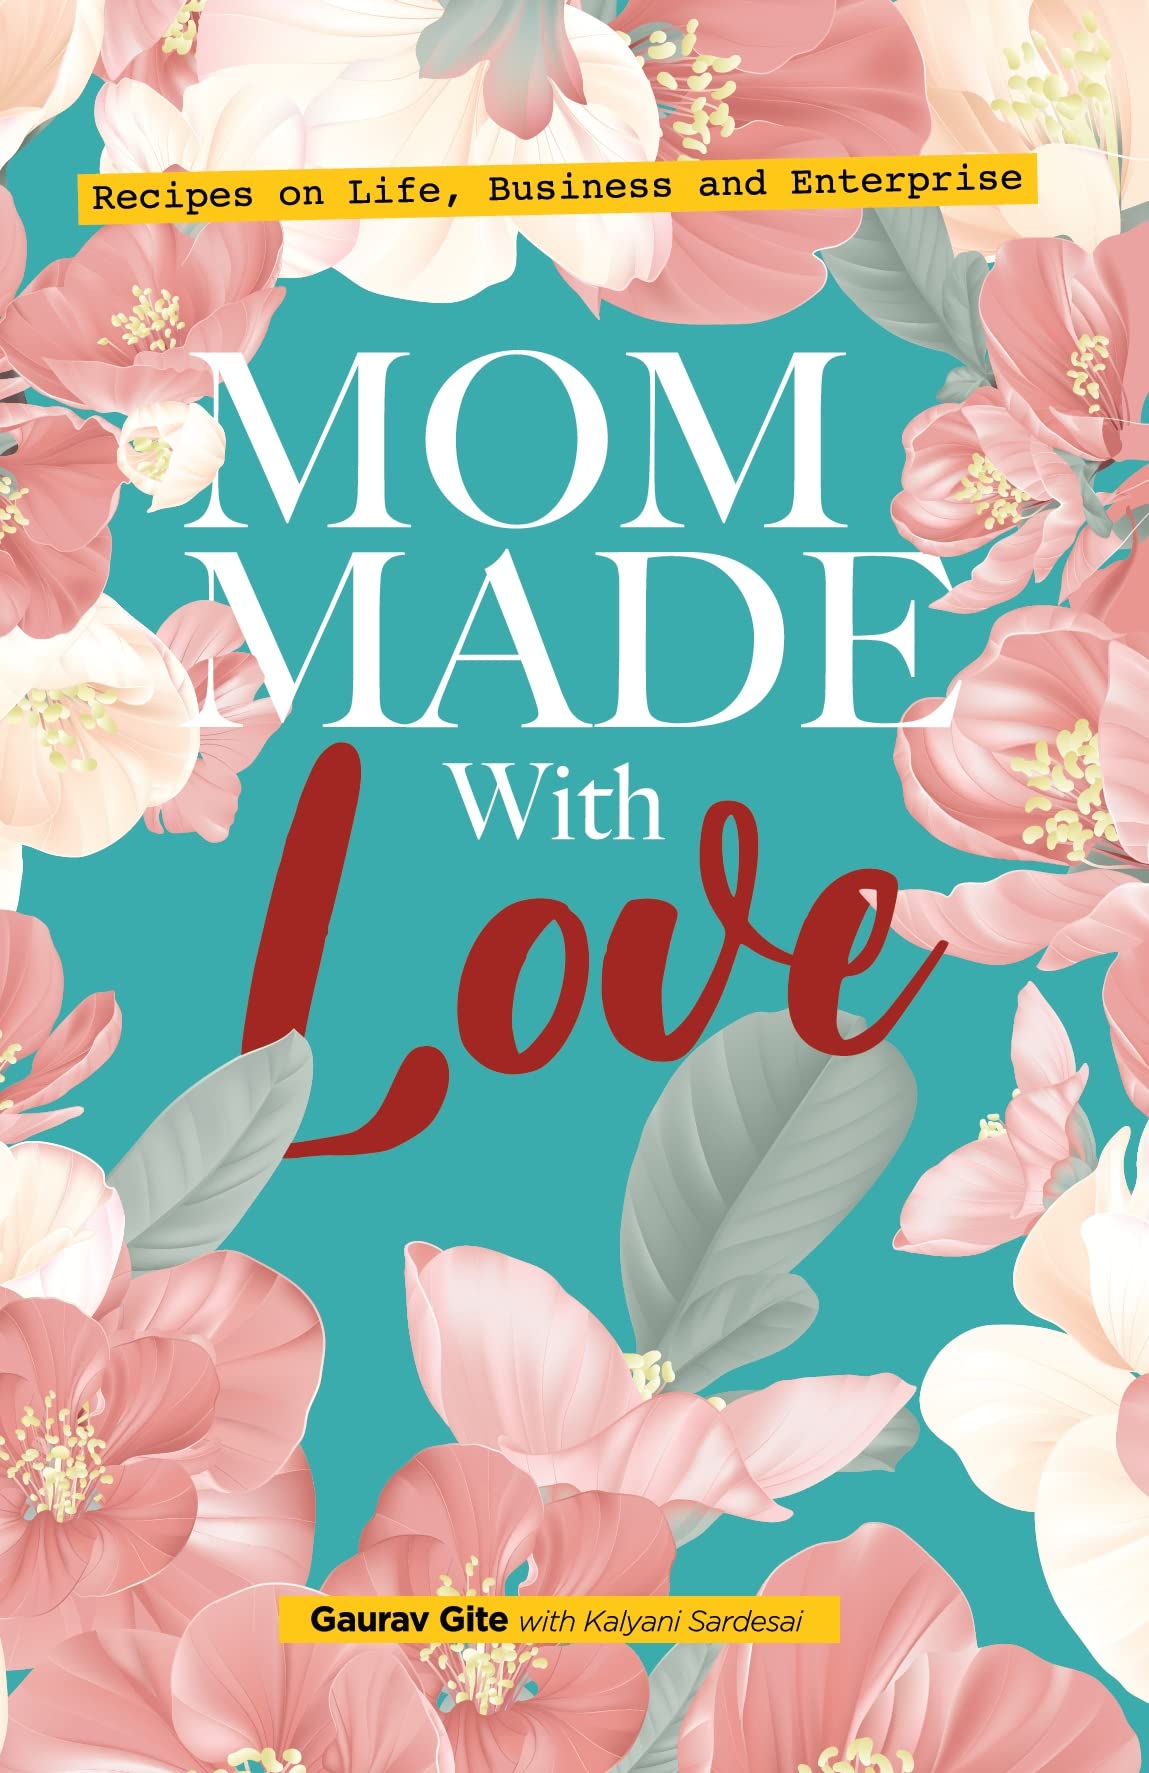 You are currently viewing Mom-made with Love: Recipes on Life. Business. Enterprise- by Gaurav Gite (with Kalyani Sardesai)